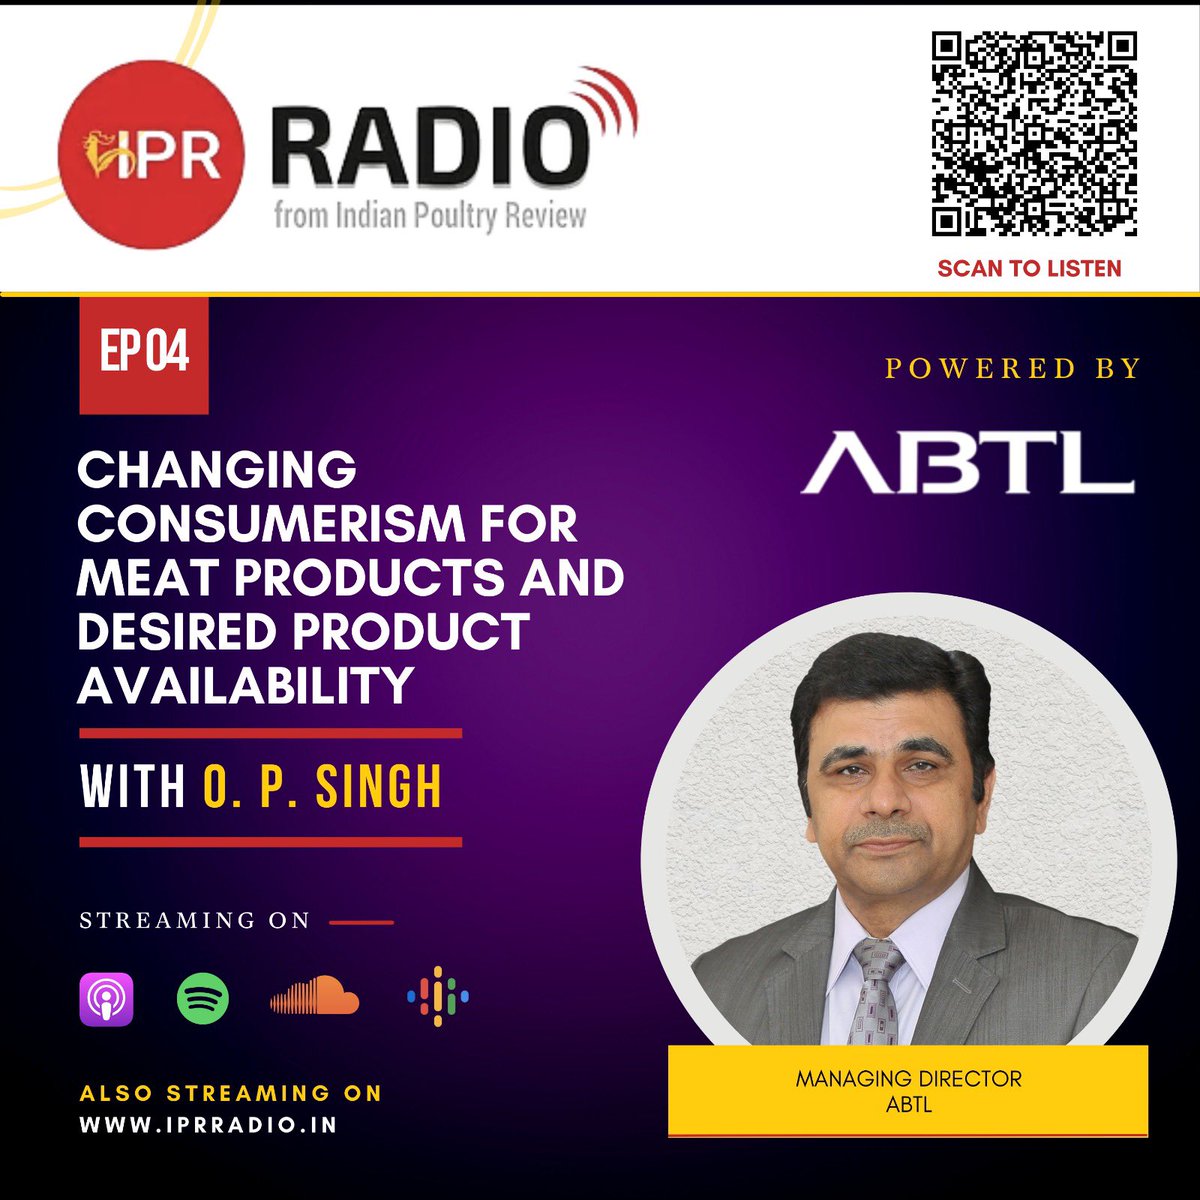 New episode of #iprradio #podcast #streaming NOW. To listen / download, scan the QR code or click on the link bit.ly/3FLgHtW
#poultry #poultryindustry #poultryprocessing  #poultryfarming #meatindustry #meatprocessing #consumerism #consumerbehavior